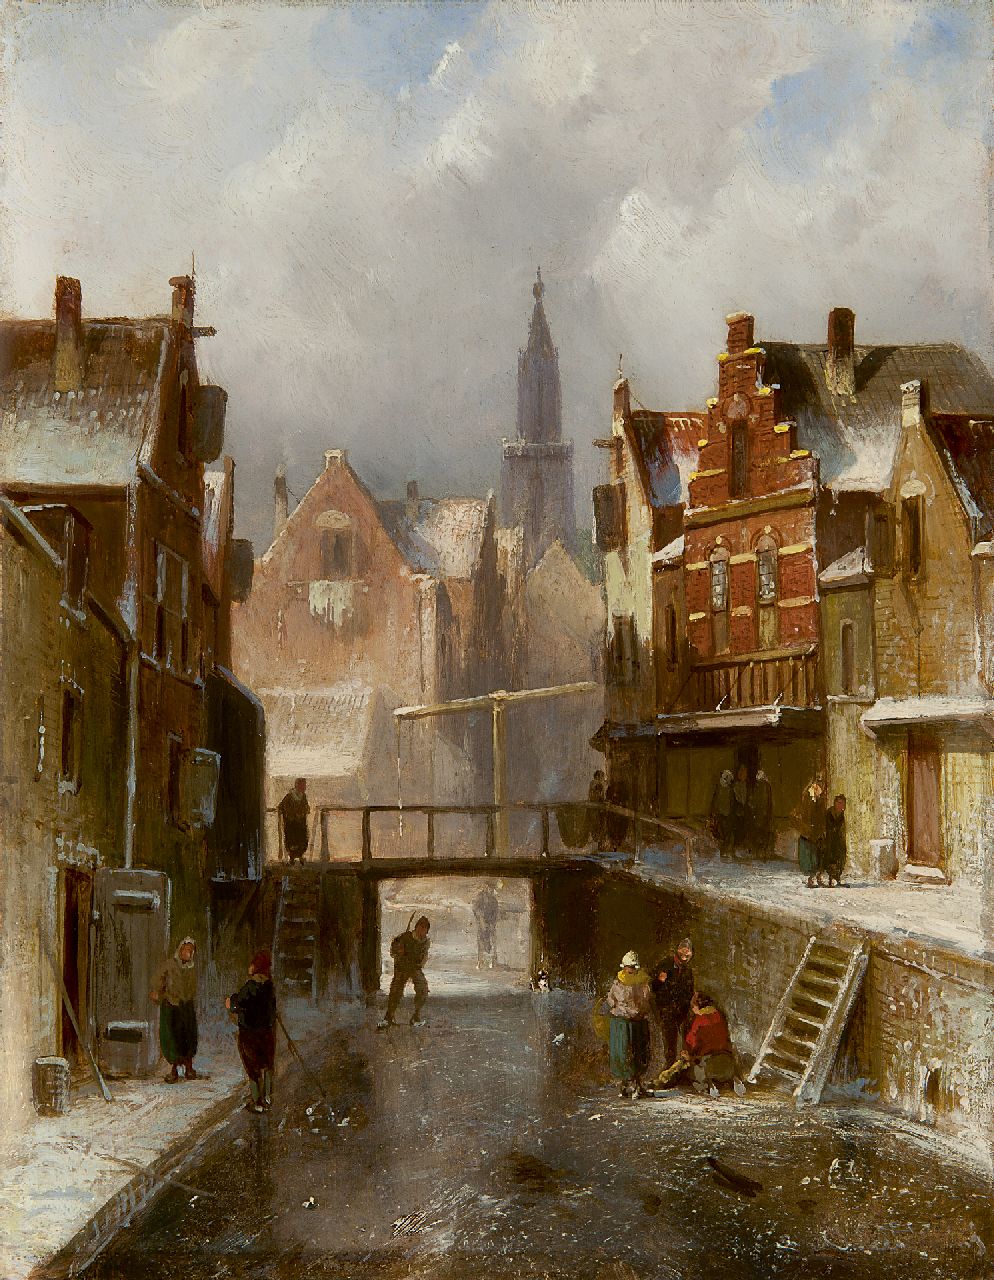 Leickert C.H.J.  | 'Charles' Henri Joseph Leickert, Ice skating at a canal, Amsterdam, oil on panel 27.0 x 20.9 cm, signed l.r.